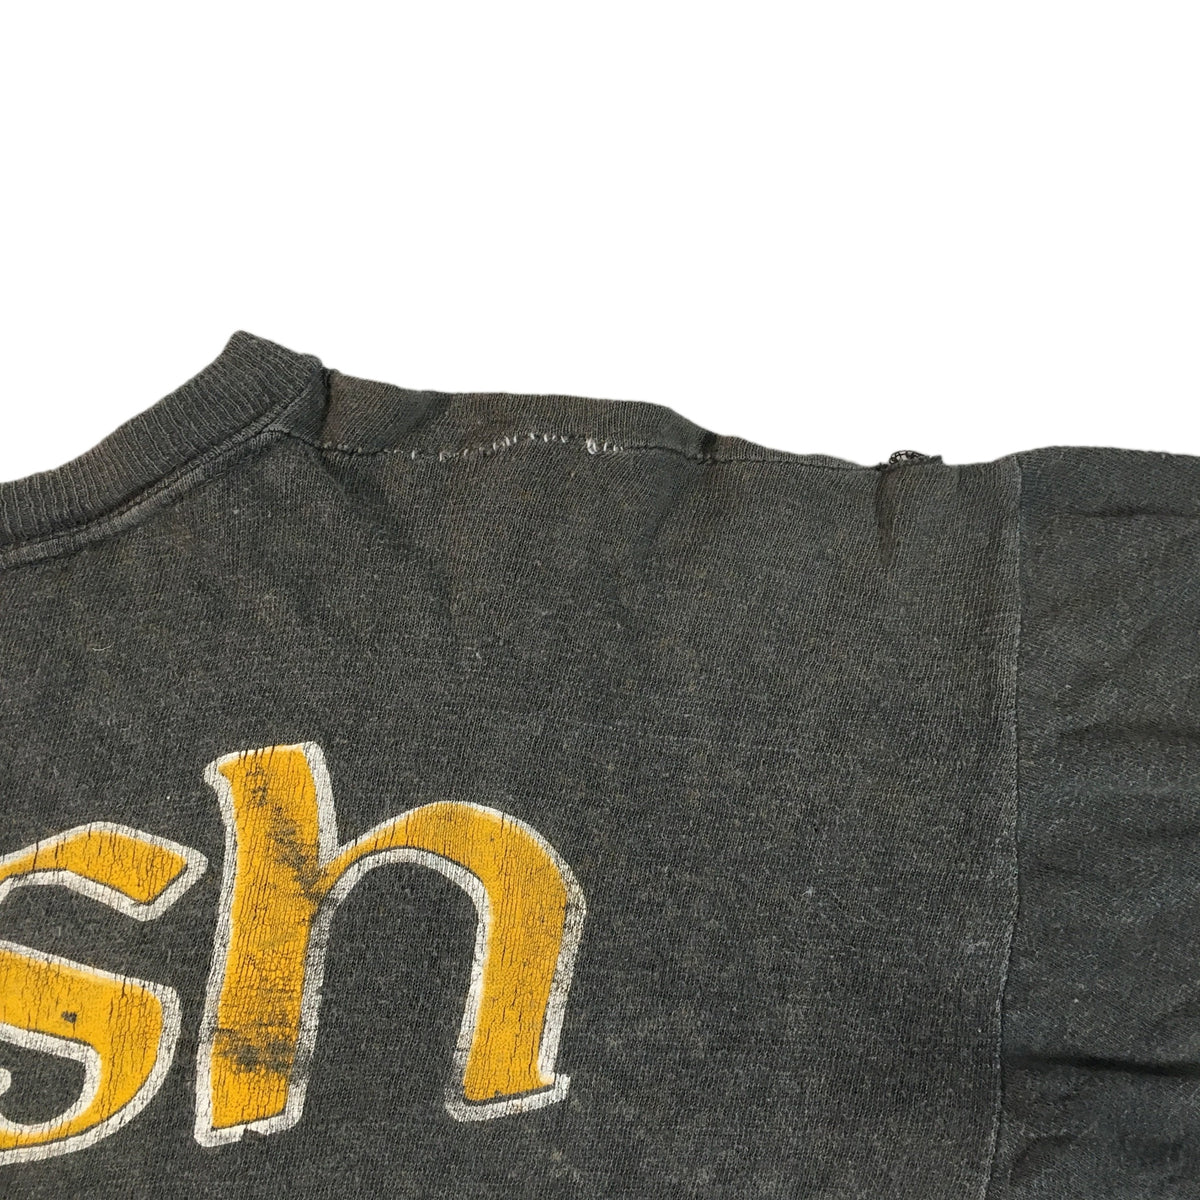 Vintage Rush &quot;A Farewell To Kings&quot; T-Shirt - jointcustodydc